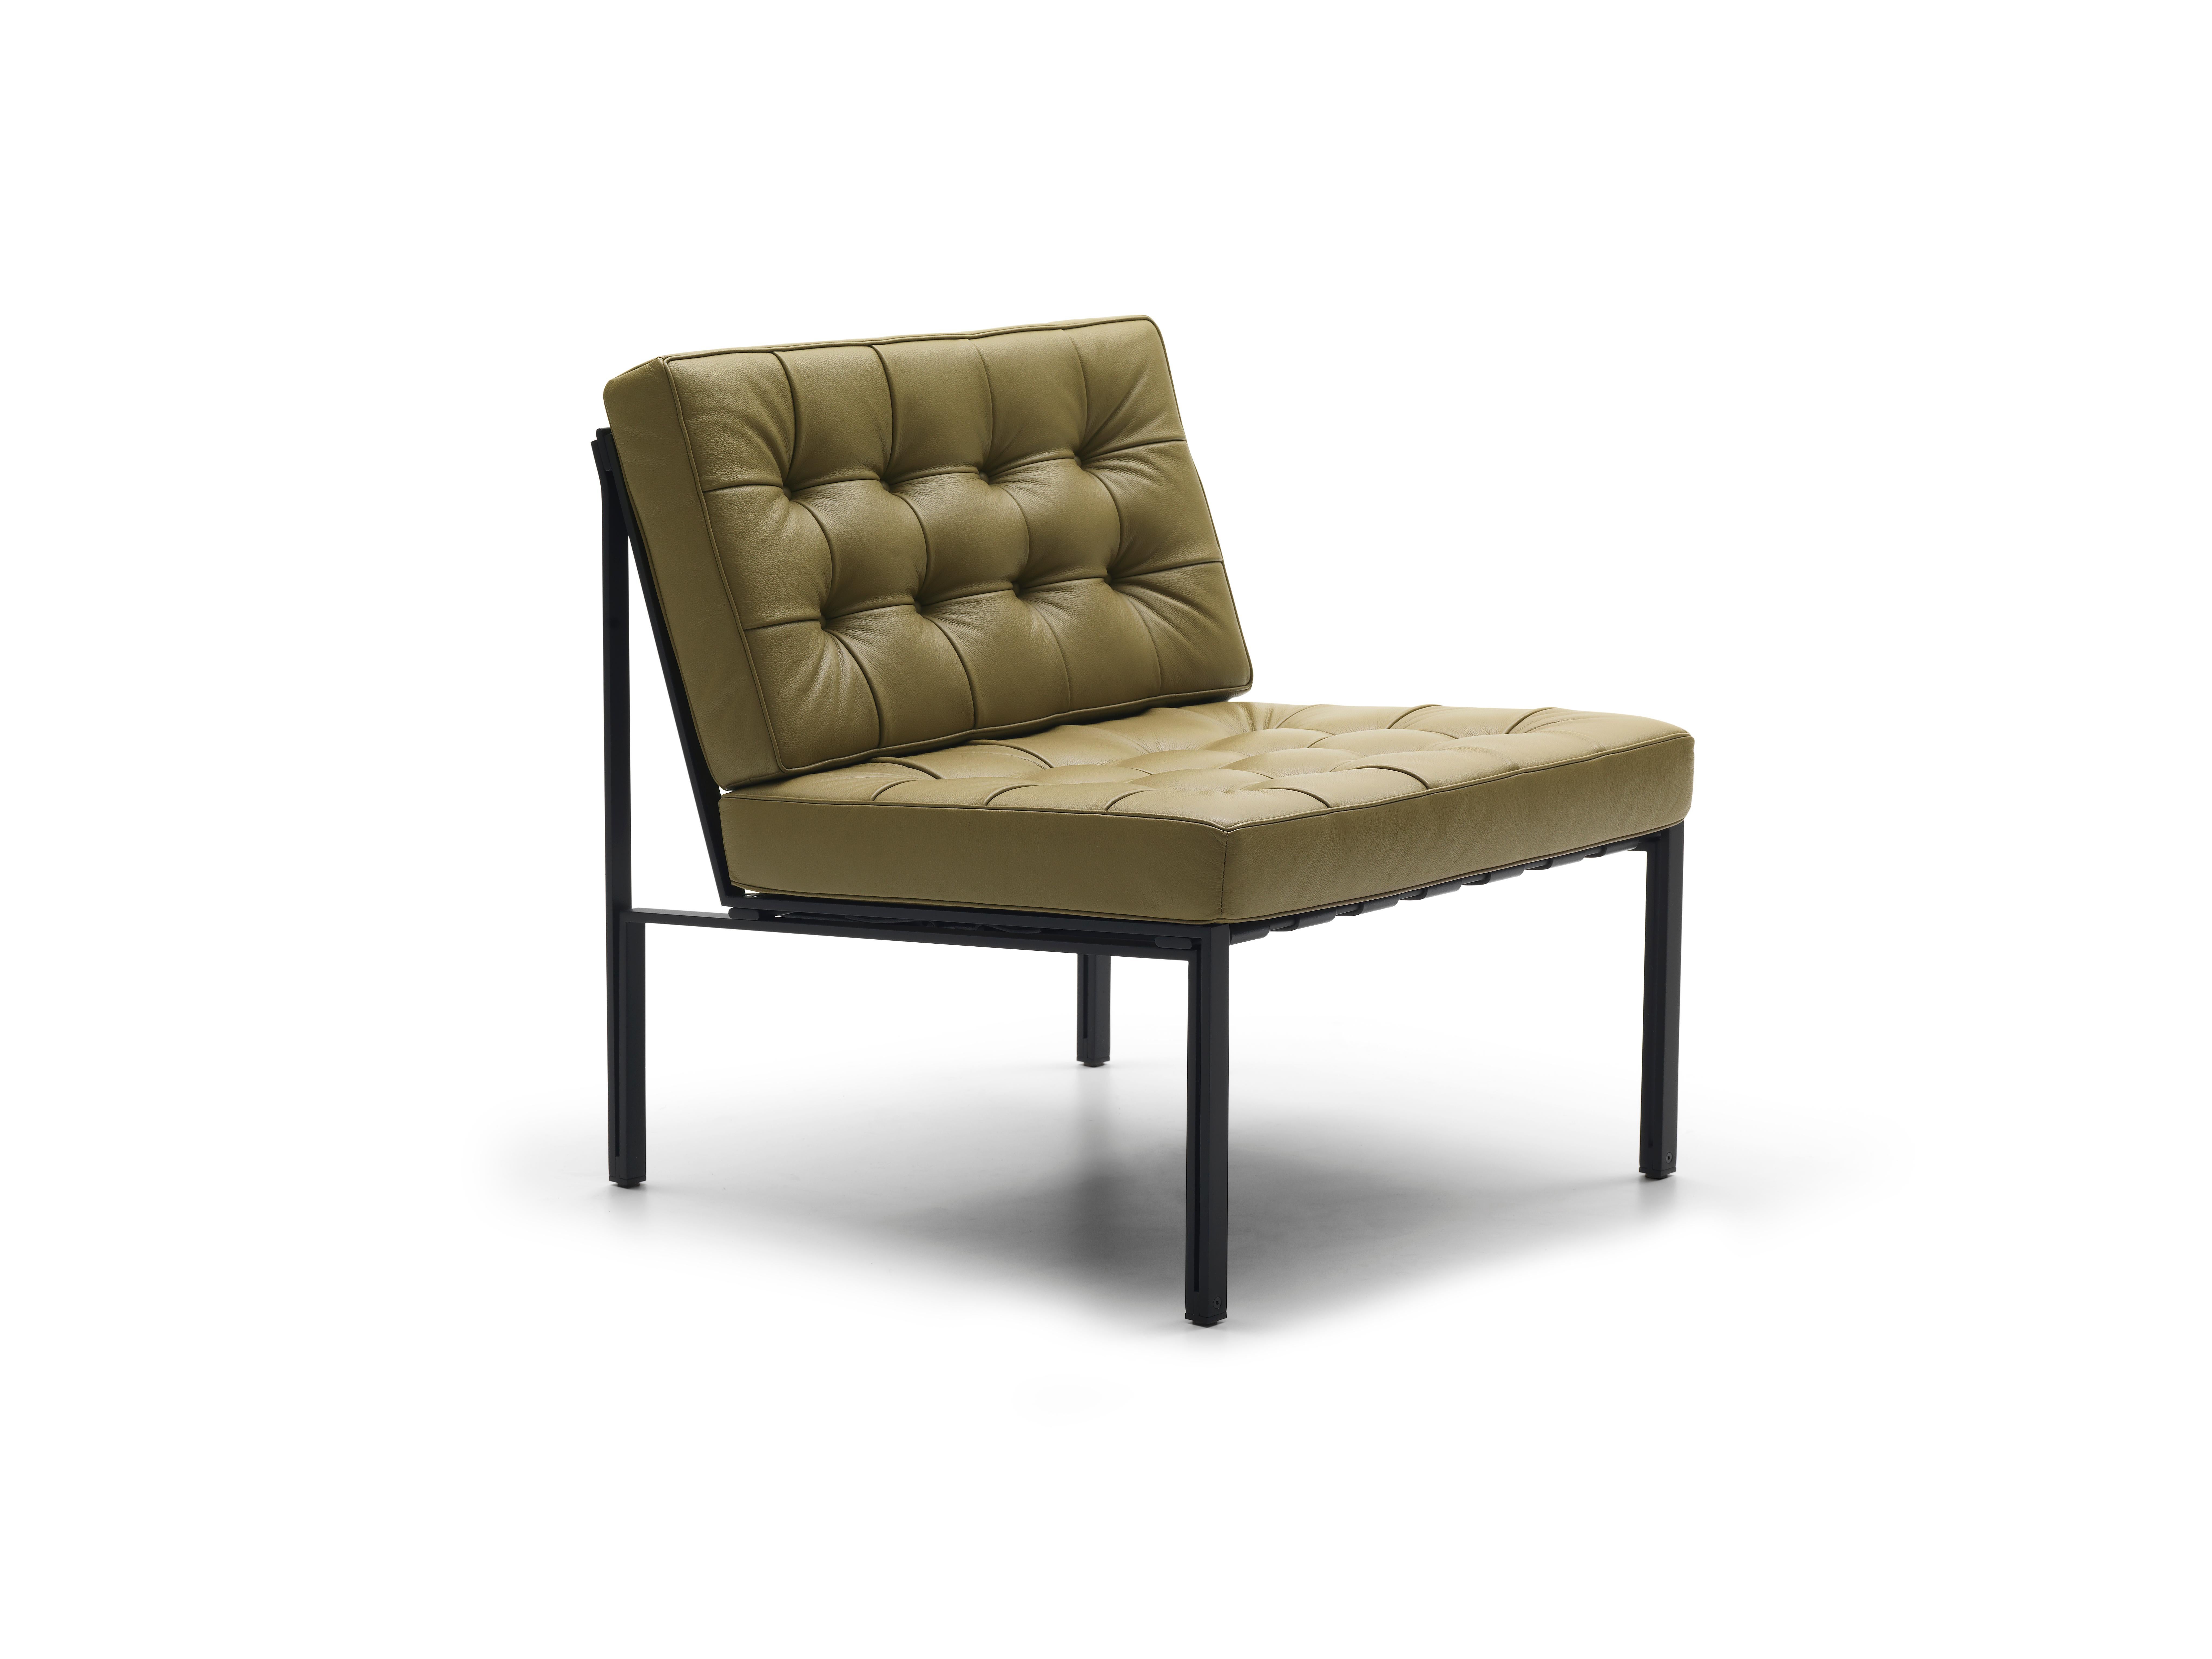 KT-221/01 lounge chair by De Sede
Dimensions: D 53 x W 67 x H 78 cm
Materials: High-gloss chrome-plated flat steel frame. Belts in black core leather. Tables high-gloss chrome-plated. SEDEX upholstery with wadding cushion (leather). 

Prices may